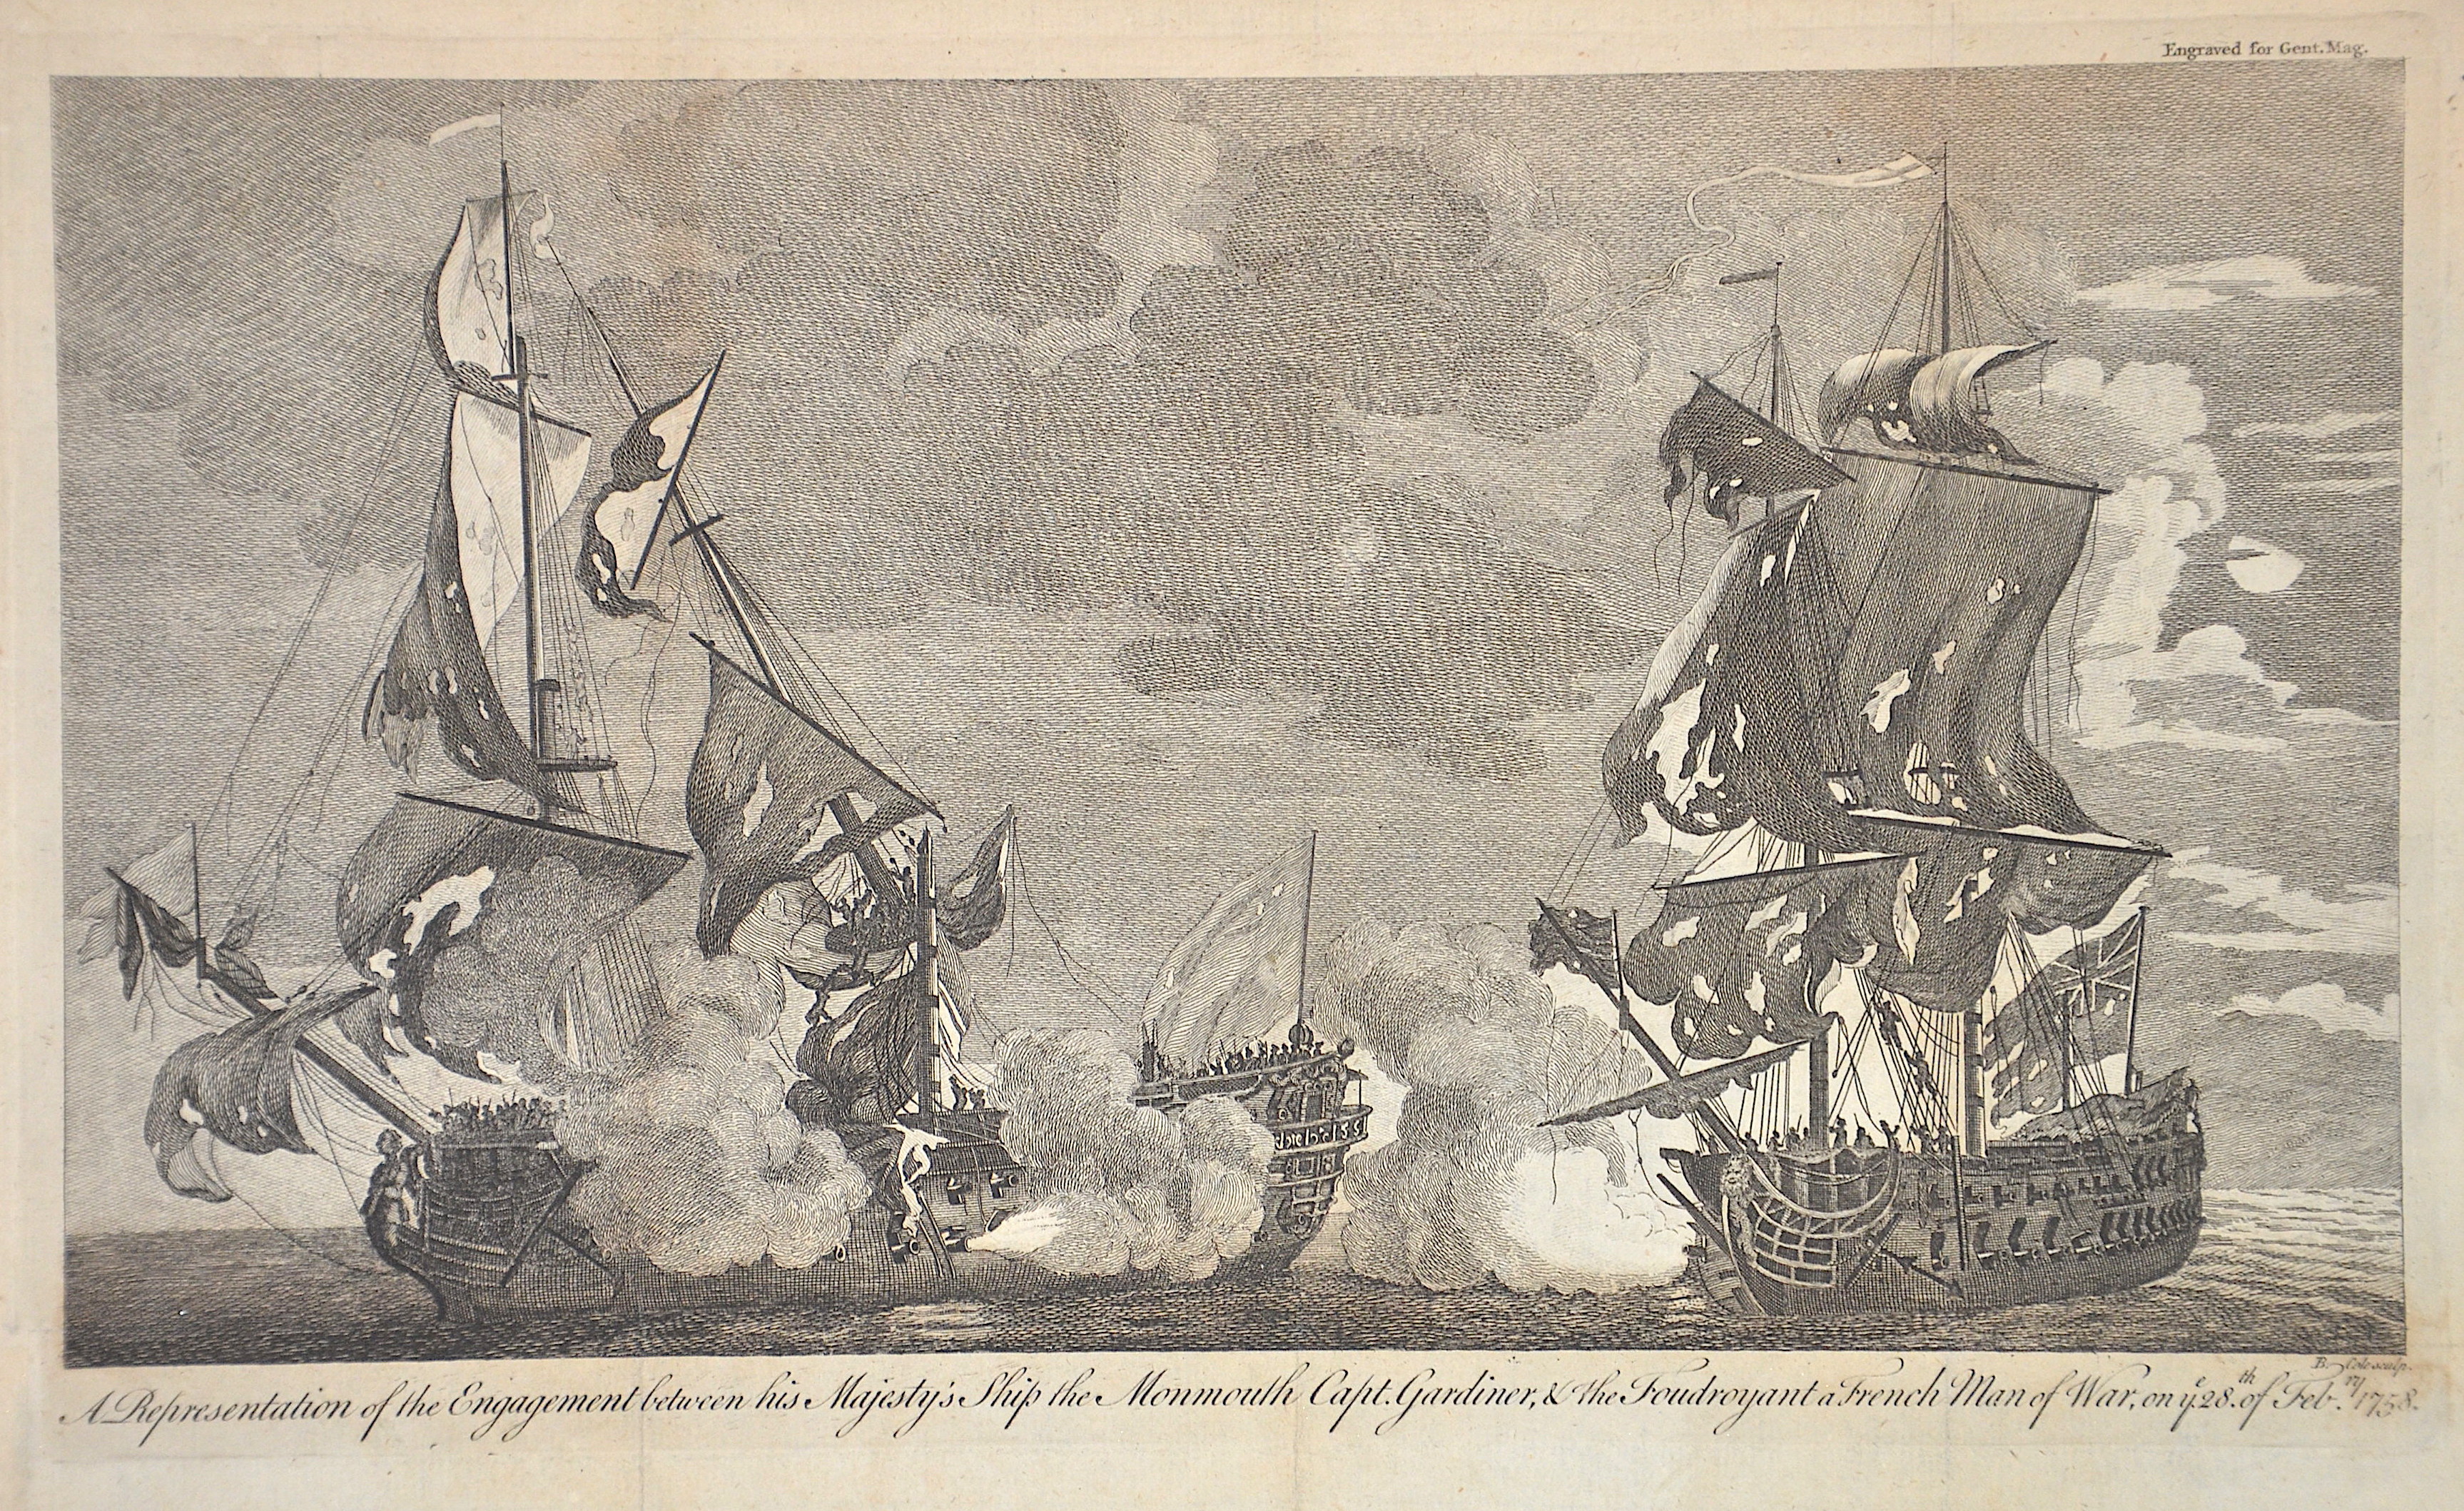 Cole  A Representation of the Engagement between his Majesty’s Ship the Monmouth Capt. Gardiner, u the Foudroyant a French Man of War, on y 28. of Feb. 1758